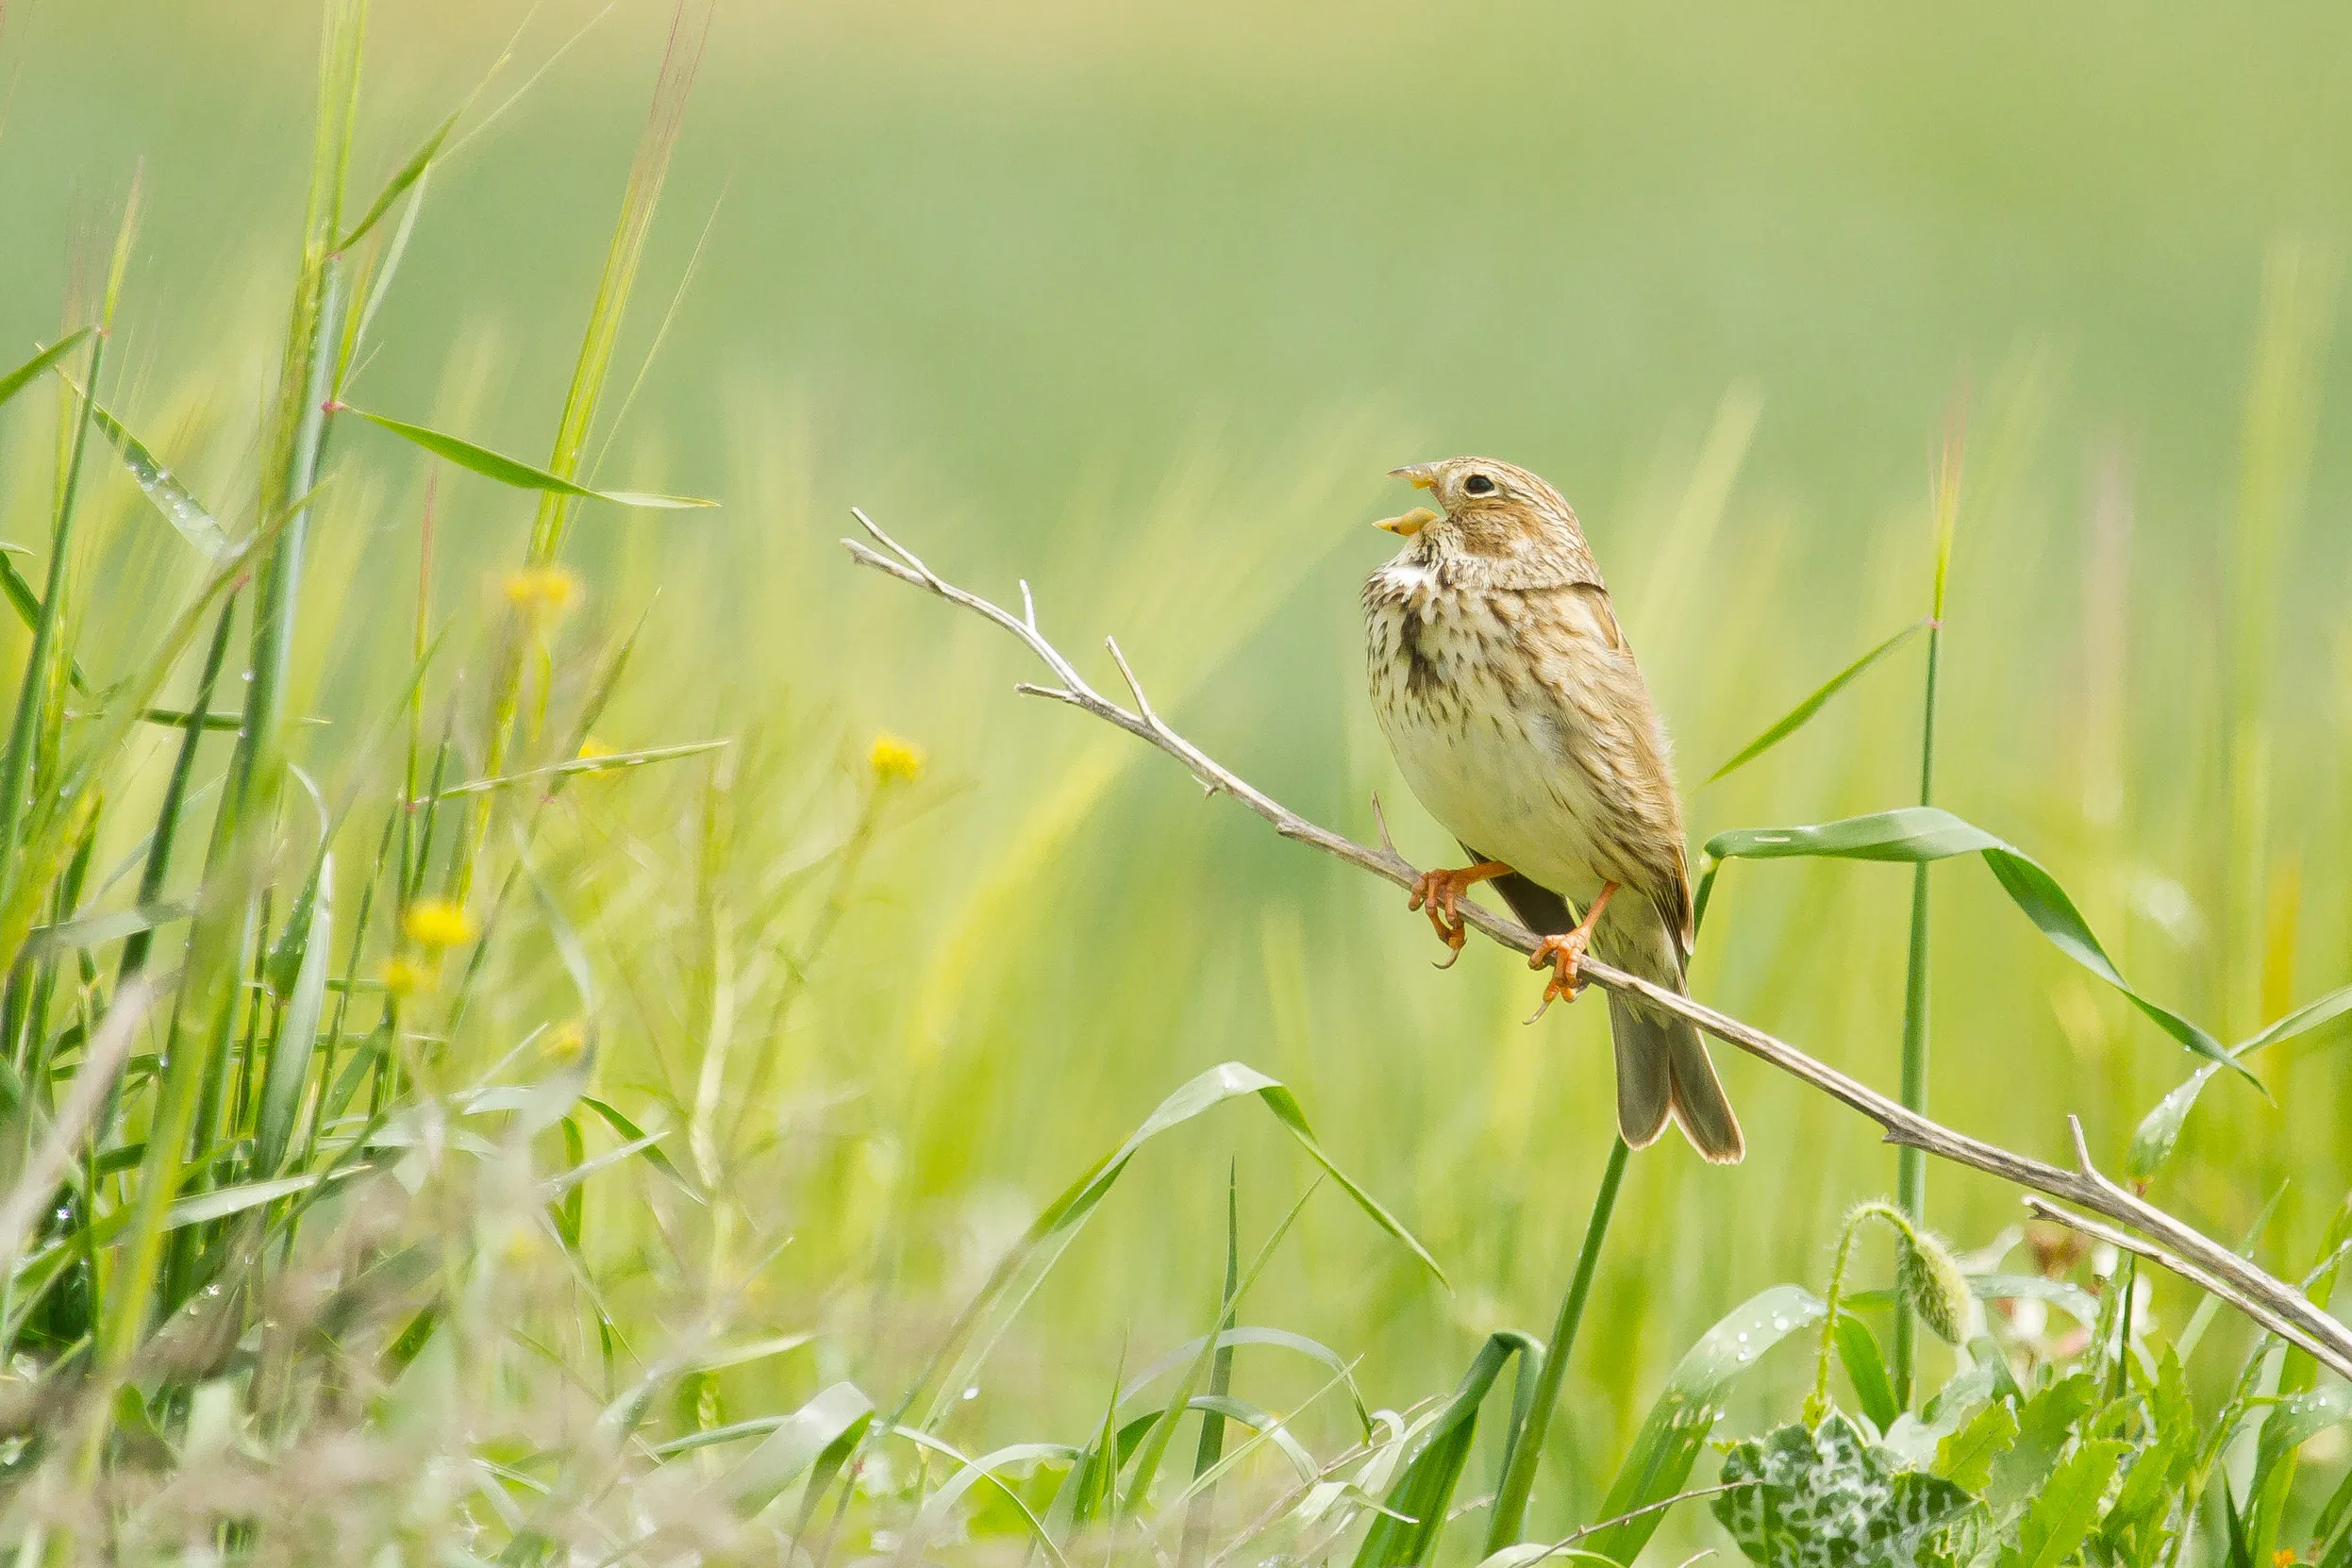 Corn Bunting singing on wheat in a field.